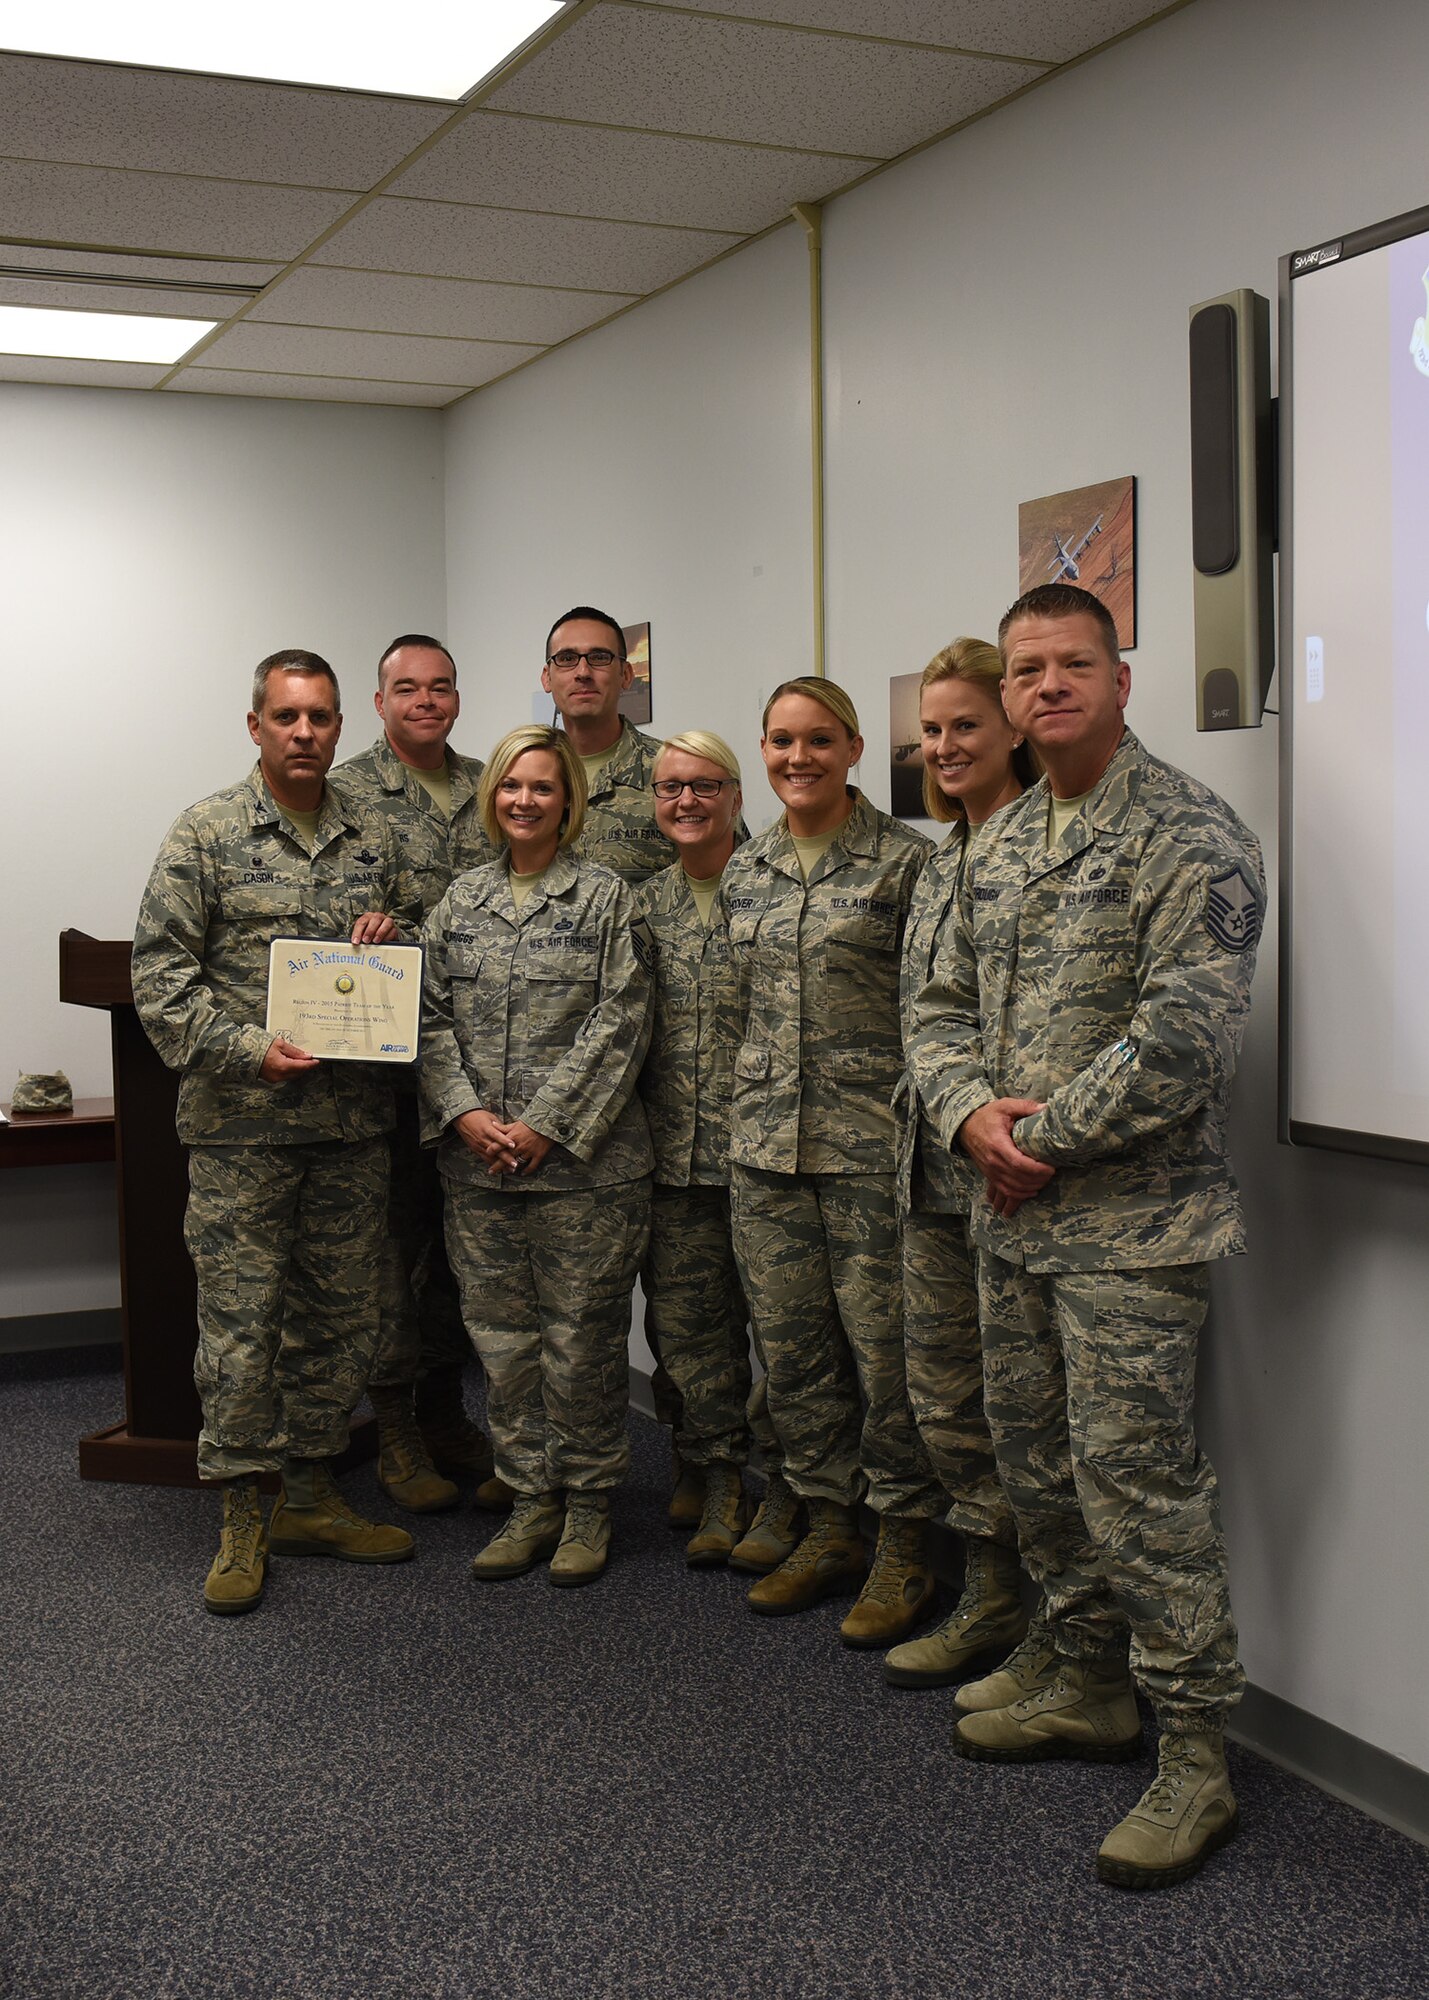 The 193rd Special Operations Wing recruiting and retention team earned the national Region IV 2015 Patriot Team of the Year award at their annual certification and training course in Gulfport, Mississippi, April 18. The Patriot Team of the Year award recognizes the top wing recruiting and retention team that showcases superior programs. This award takes into account leadership and job performance, significant self-improvement as well as base and community involvement. (U.S. Air National Guard photo by Airman 1st Class Julia Sorber/Released)